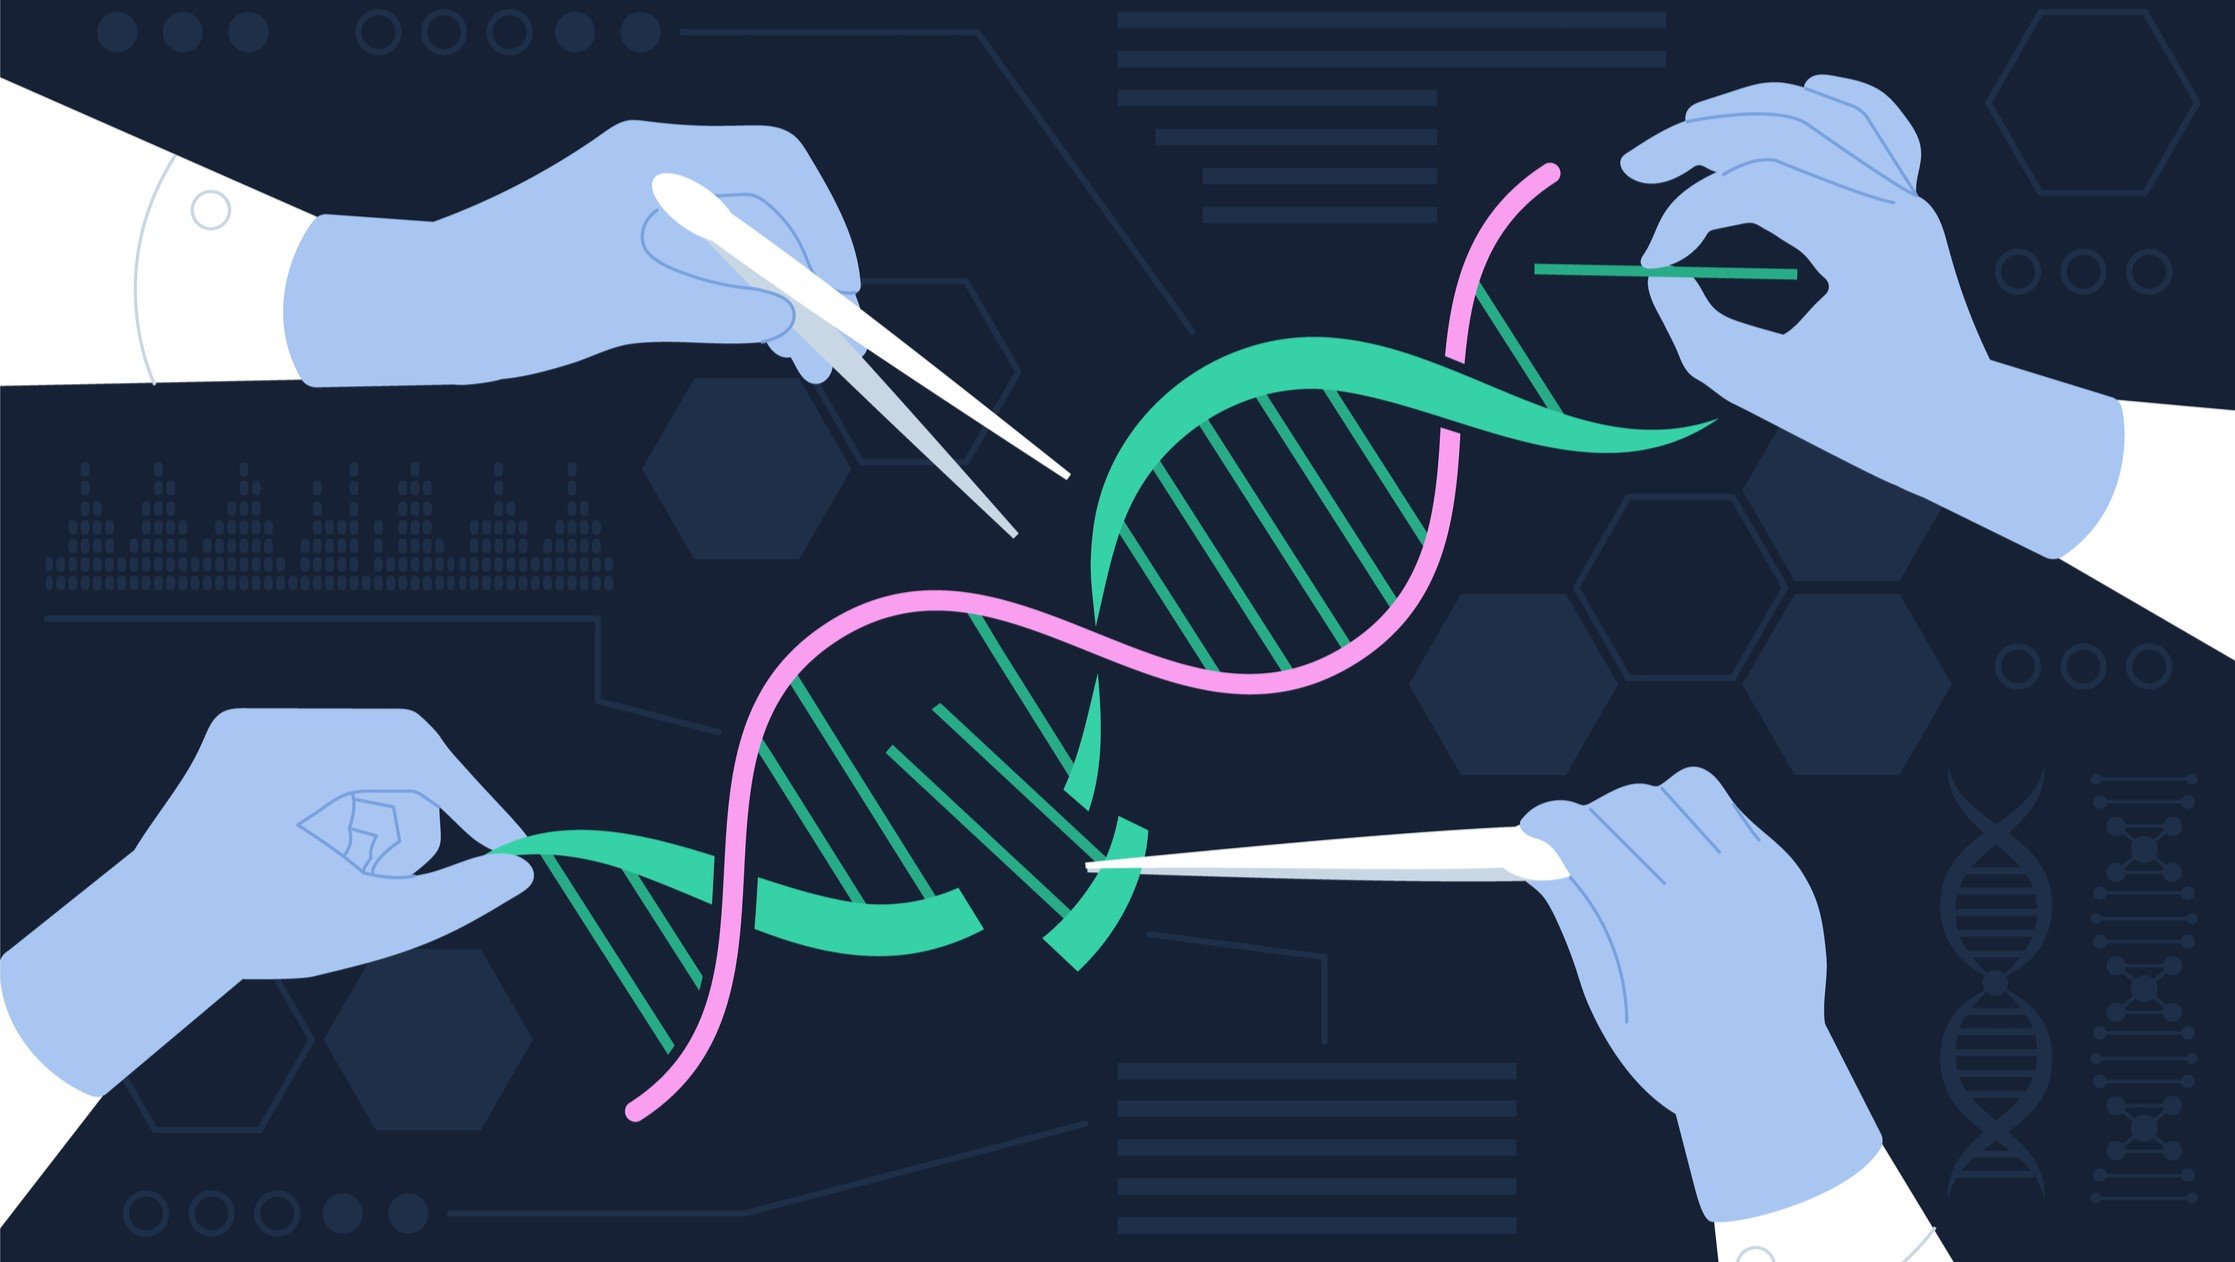 CRISPR pioneer Doudna allies with Danaher for gene editing center targeting rare disease and beyond